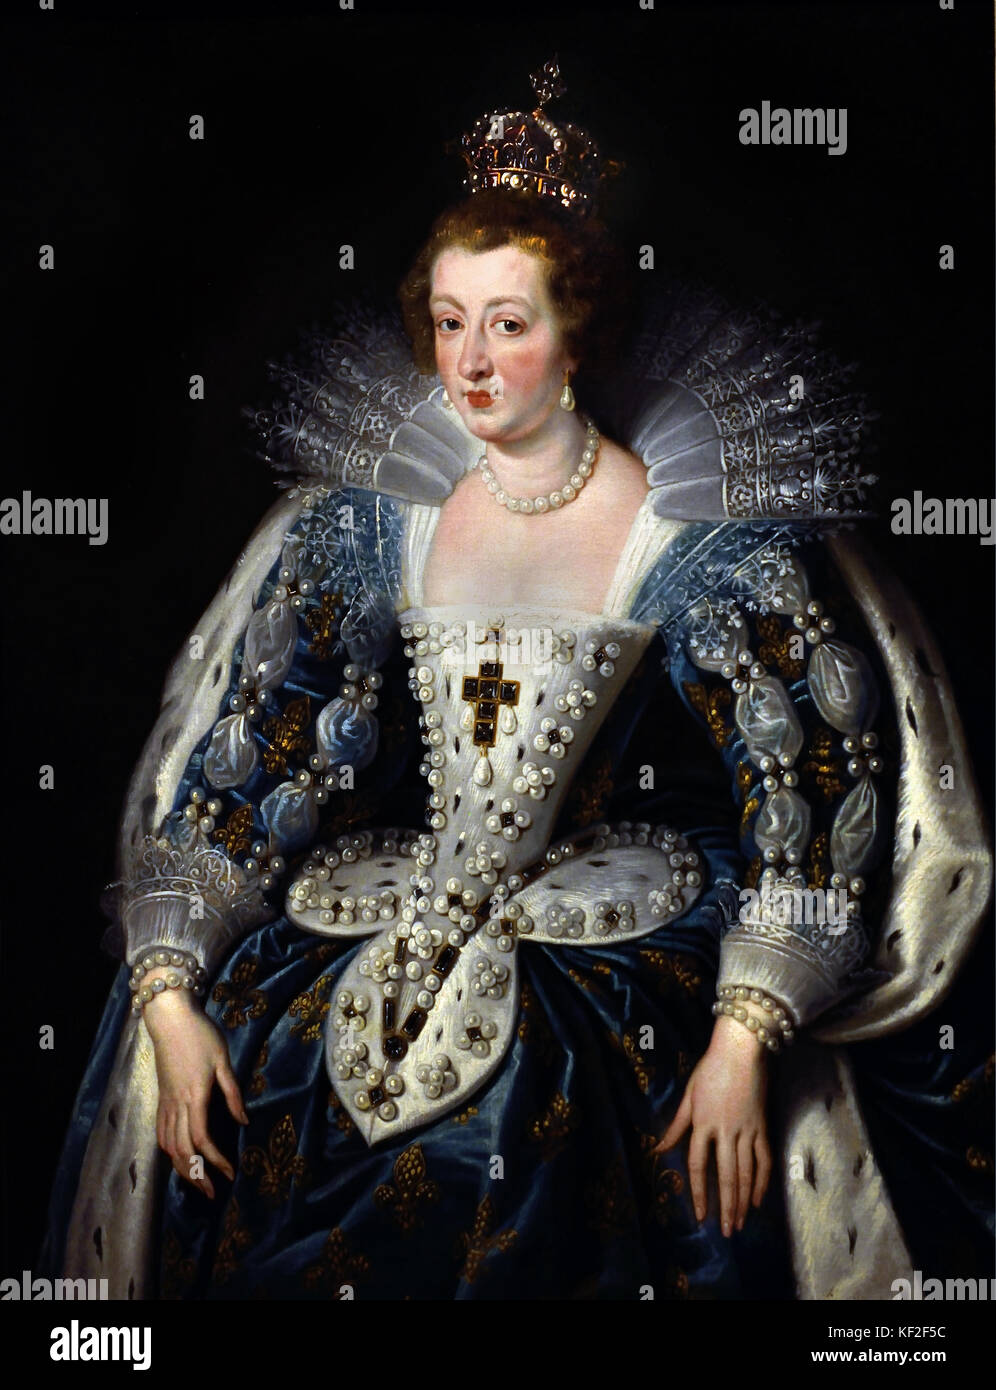 Wife Of Louis Xiii Stock Photos & Wife Of Louis Xiii Stock Images - Alamy